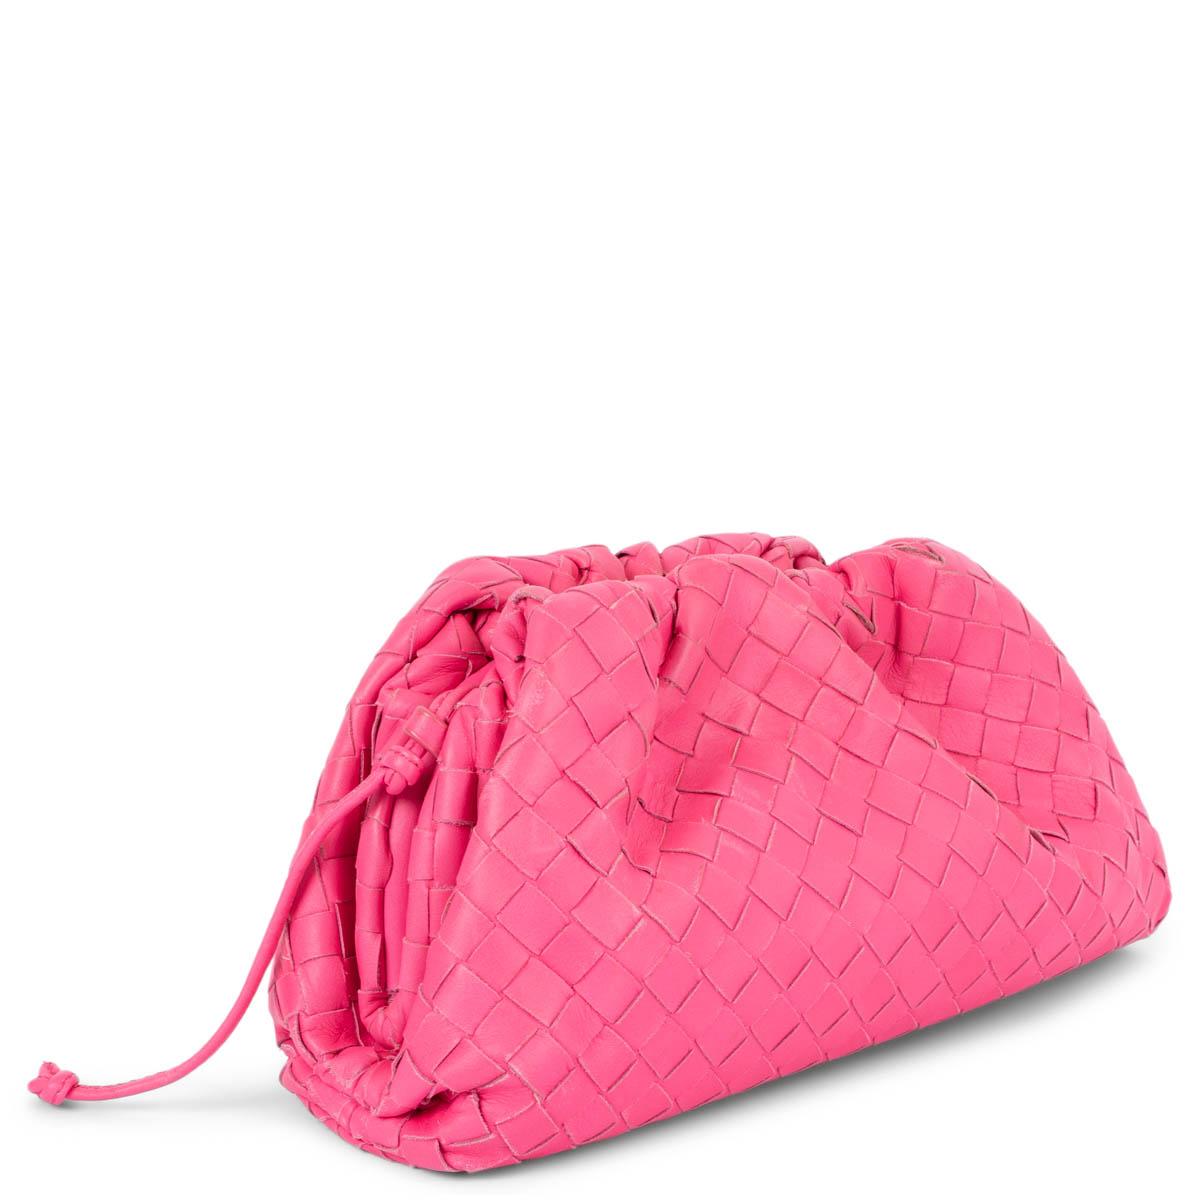 100% authentic Bottega Veneta Mini Pouch in hot pink Intrecciato leather. Opens with a magnetic frame closure and has a single compartment lined in calfskin.Has been carried and shows some soft wear to some the Intrecciato edges. Overall in very